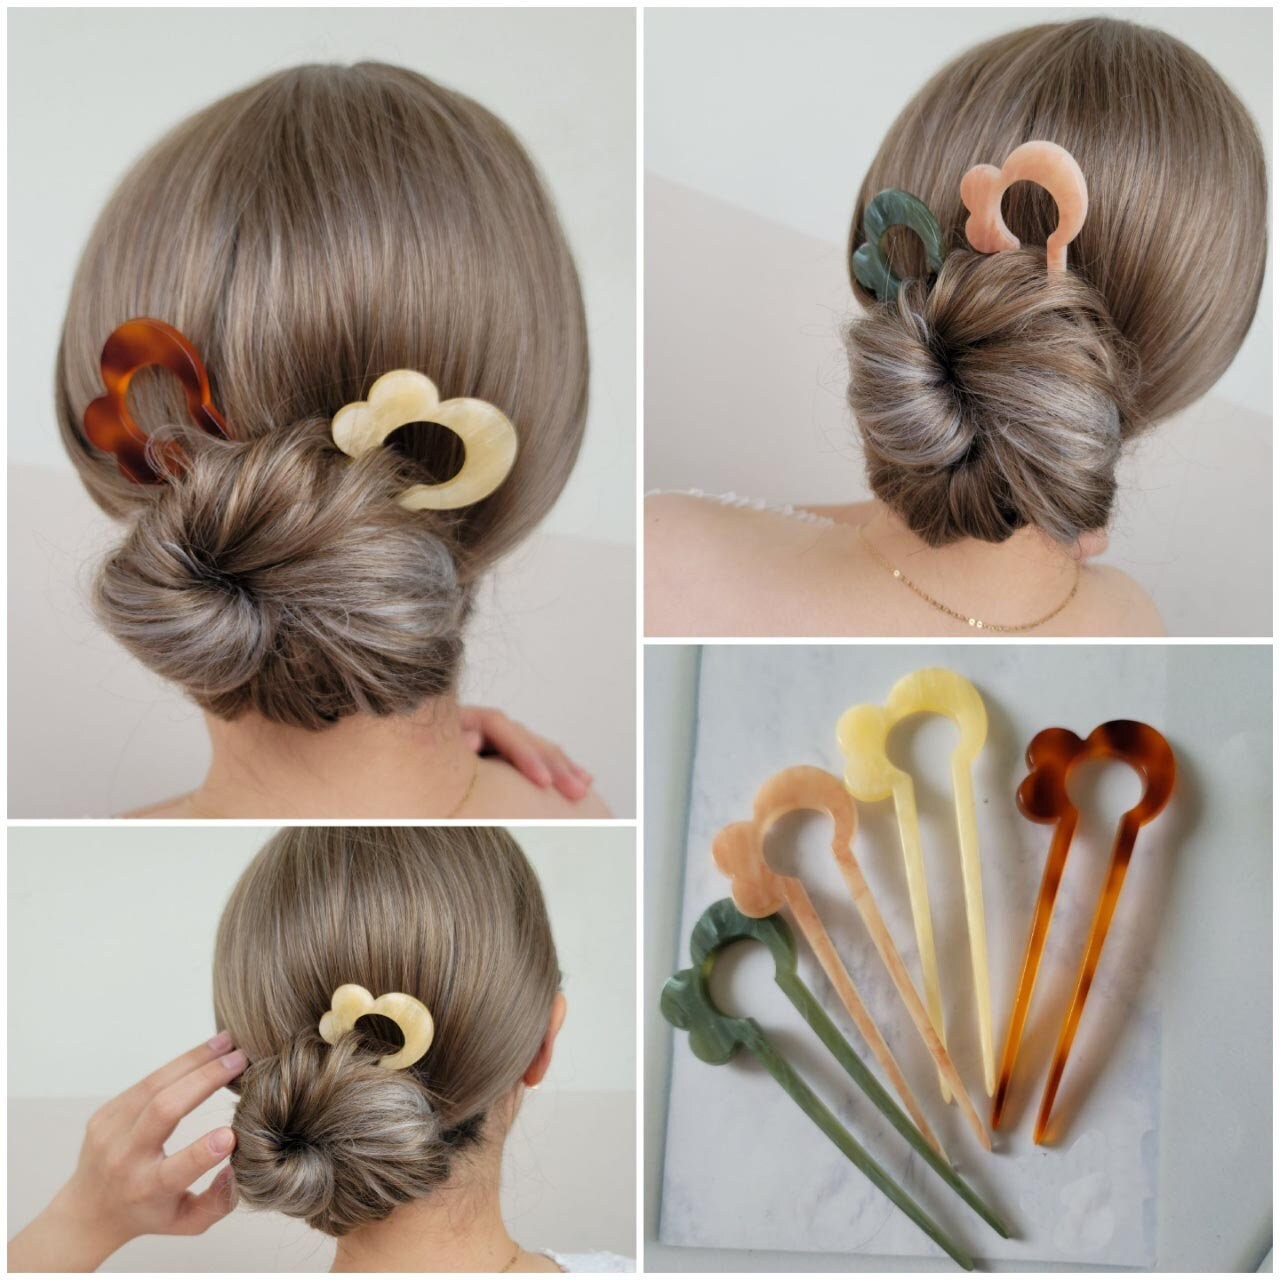 8 Hair Accessories + Styling Tips From Bedhead To Top Knot Bun, Gretchy -  The Homemaker - Traditional Food Preparation